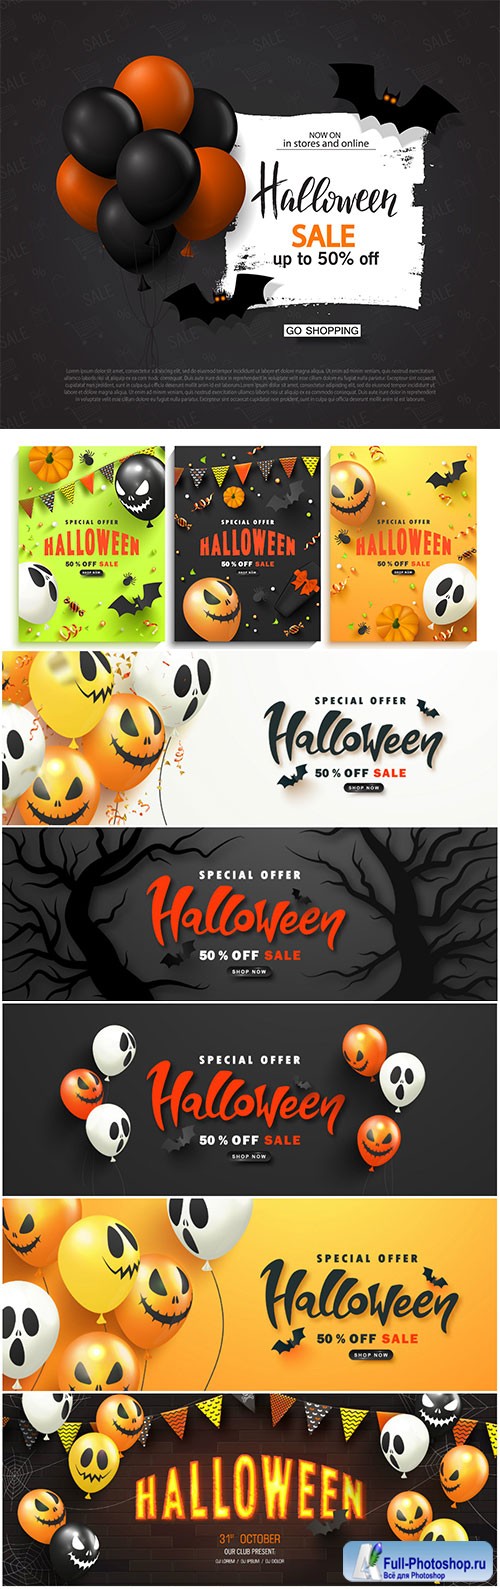 Halloween vector poster with scary balloons and paper bats